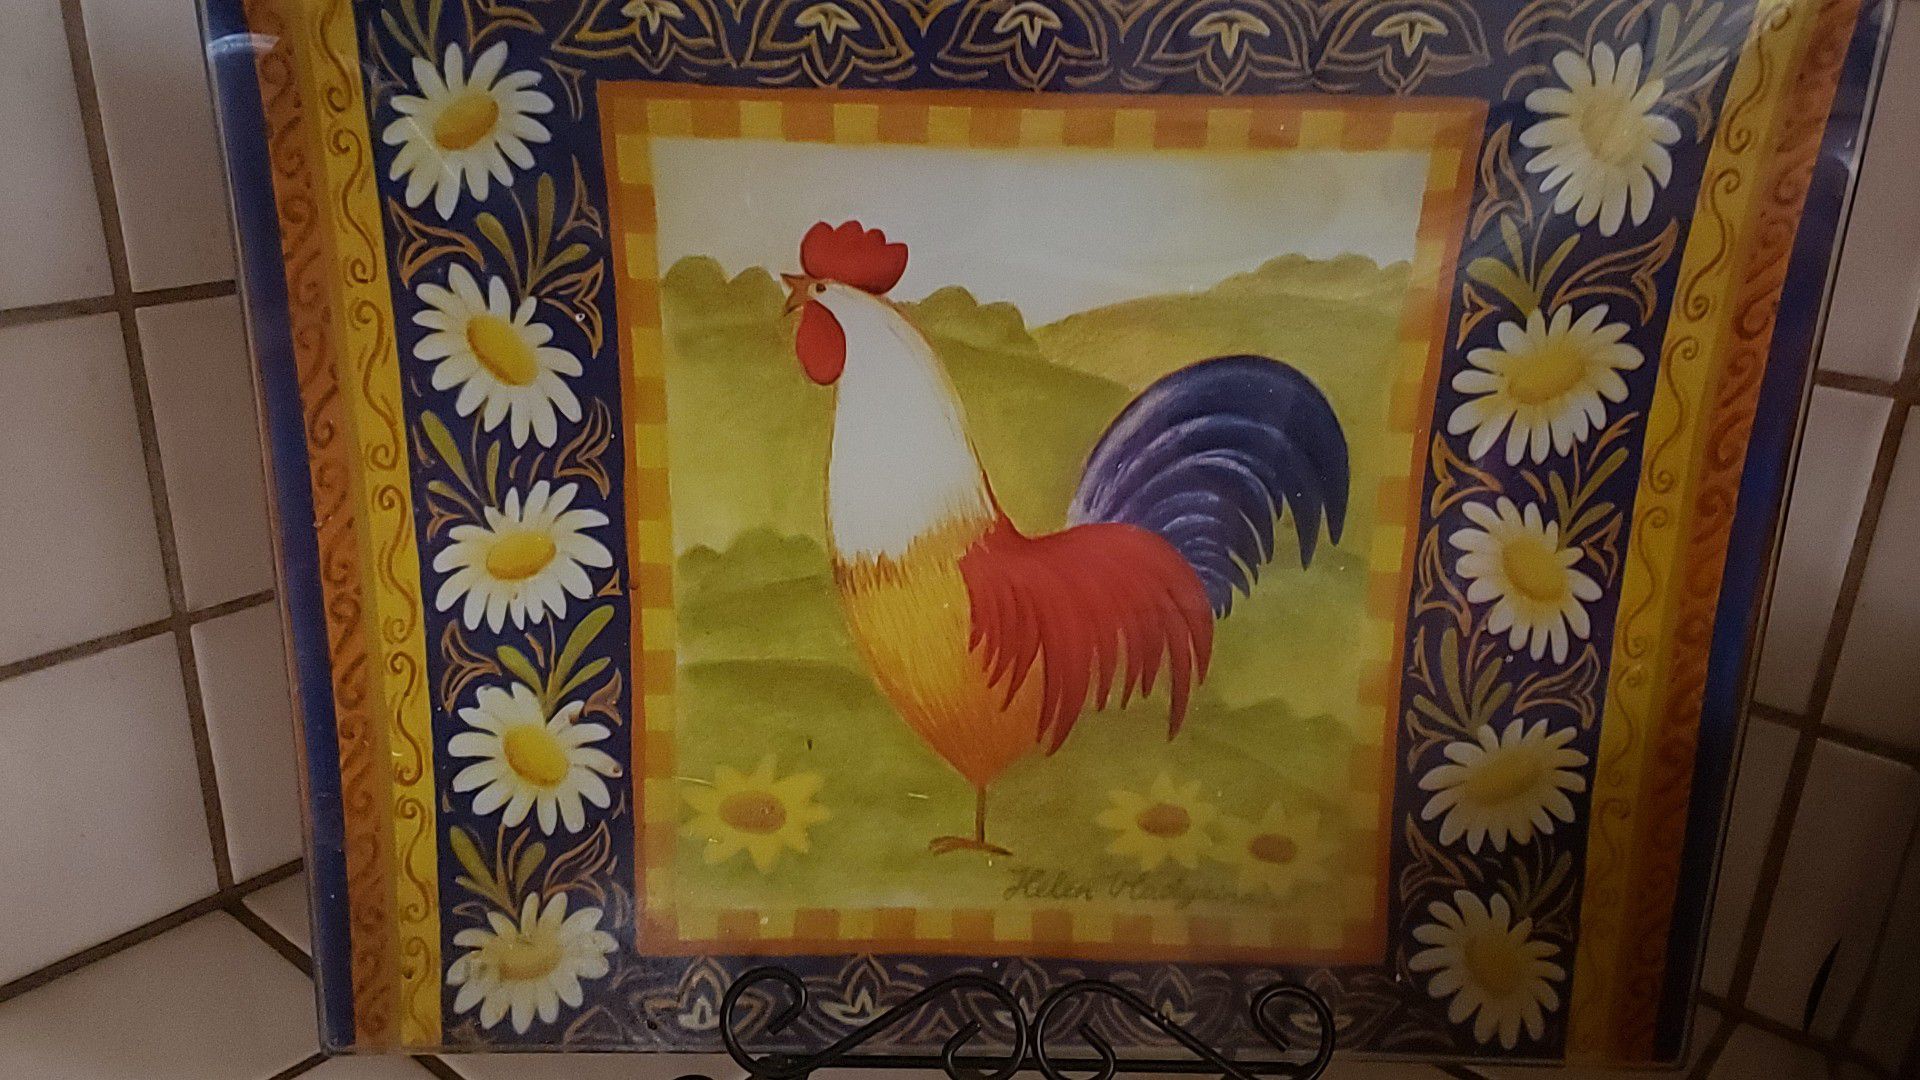 Roosters frame